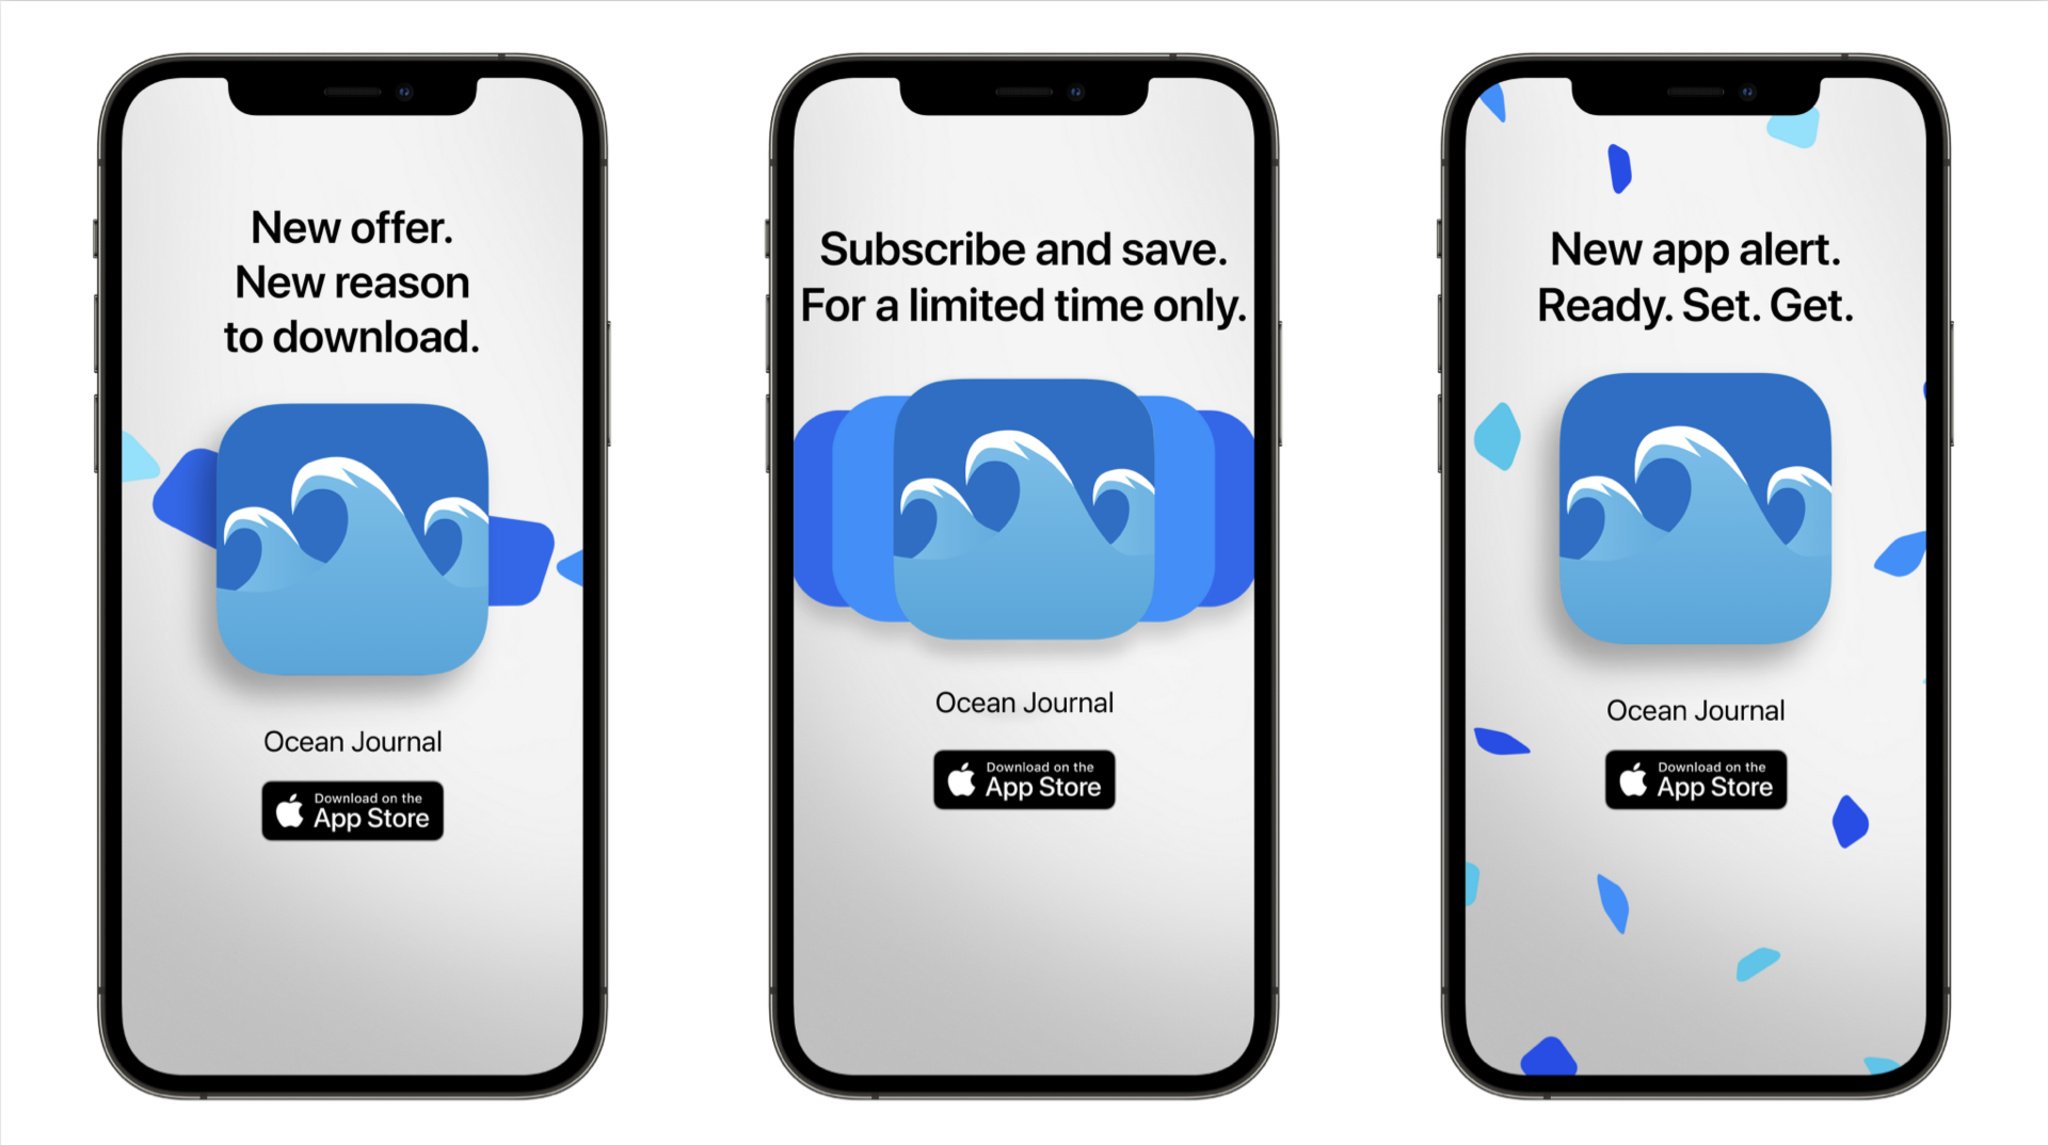 Marketing Assets in the App Store Connect App